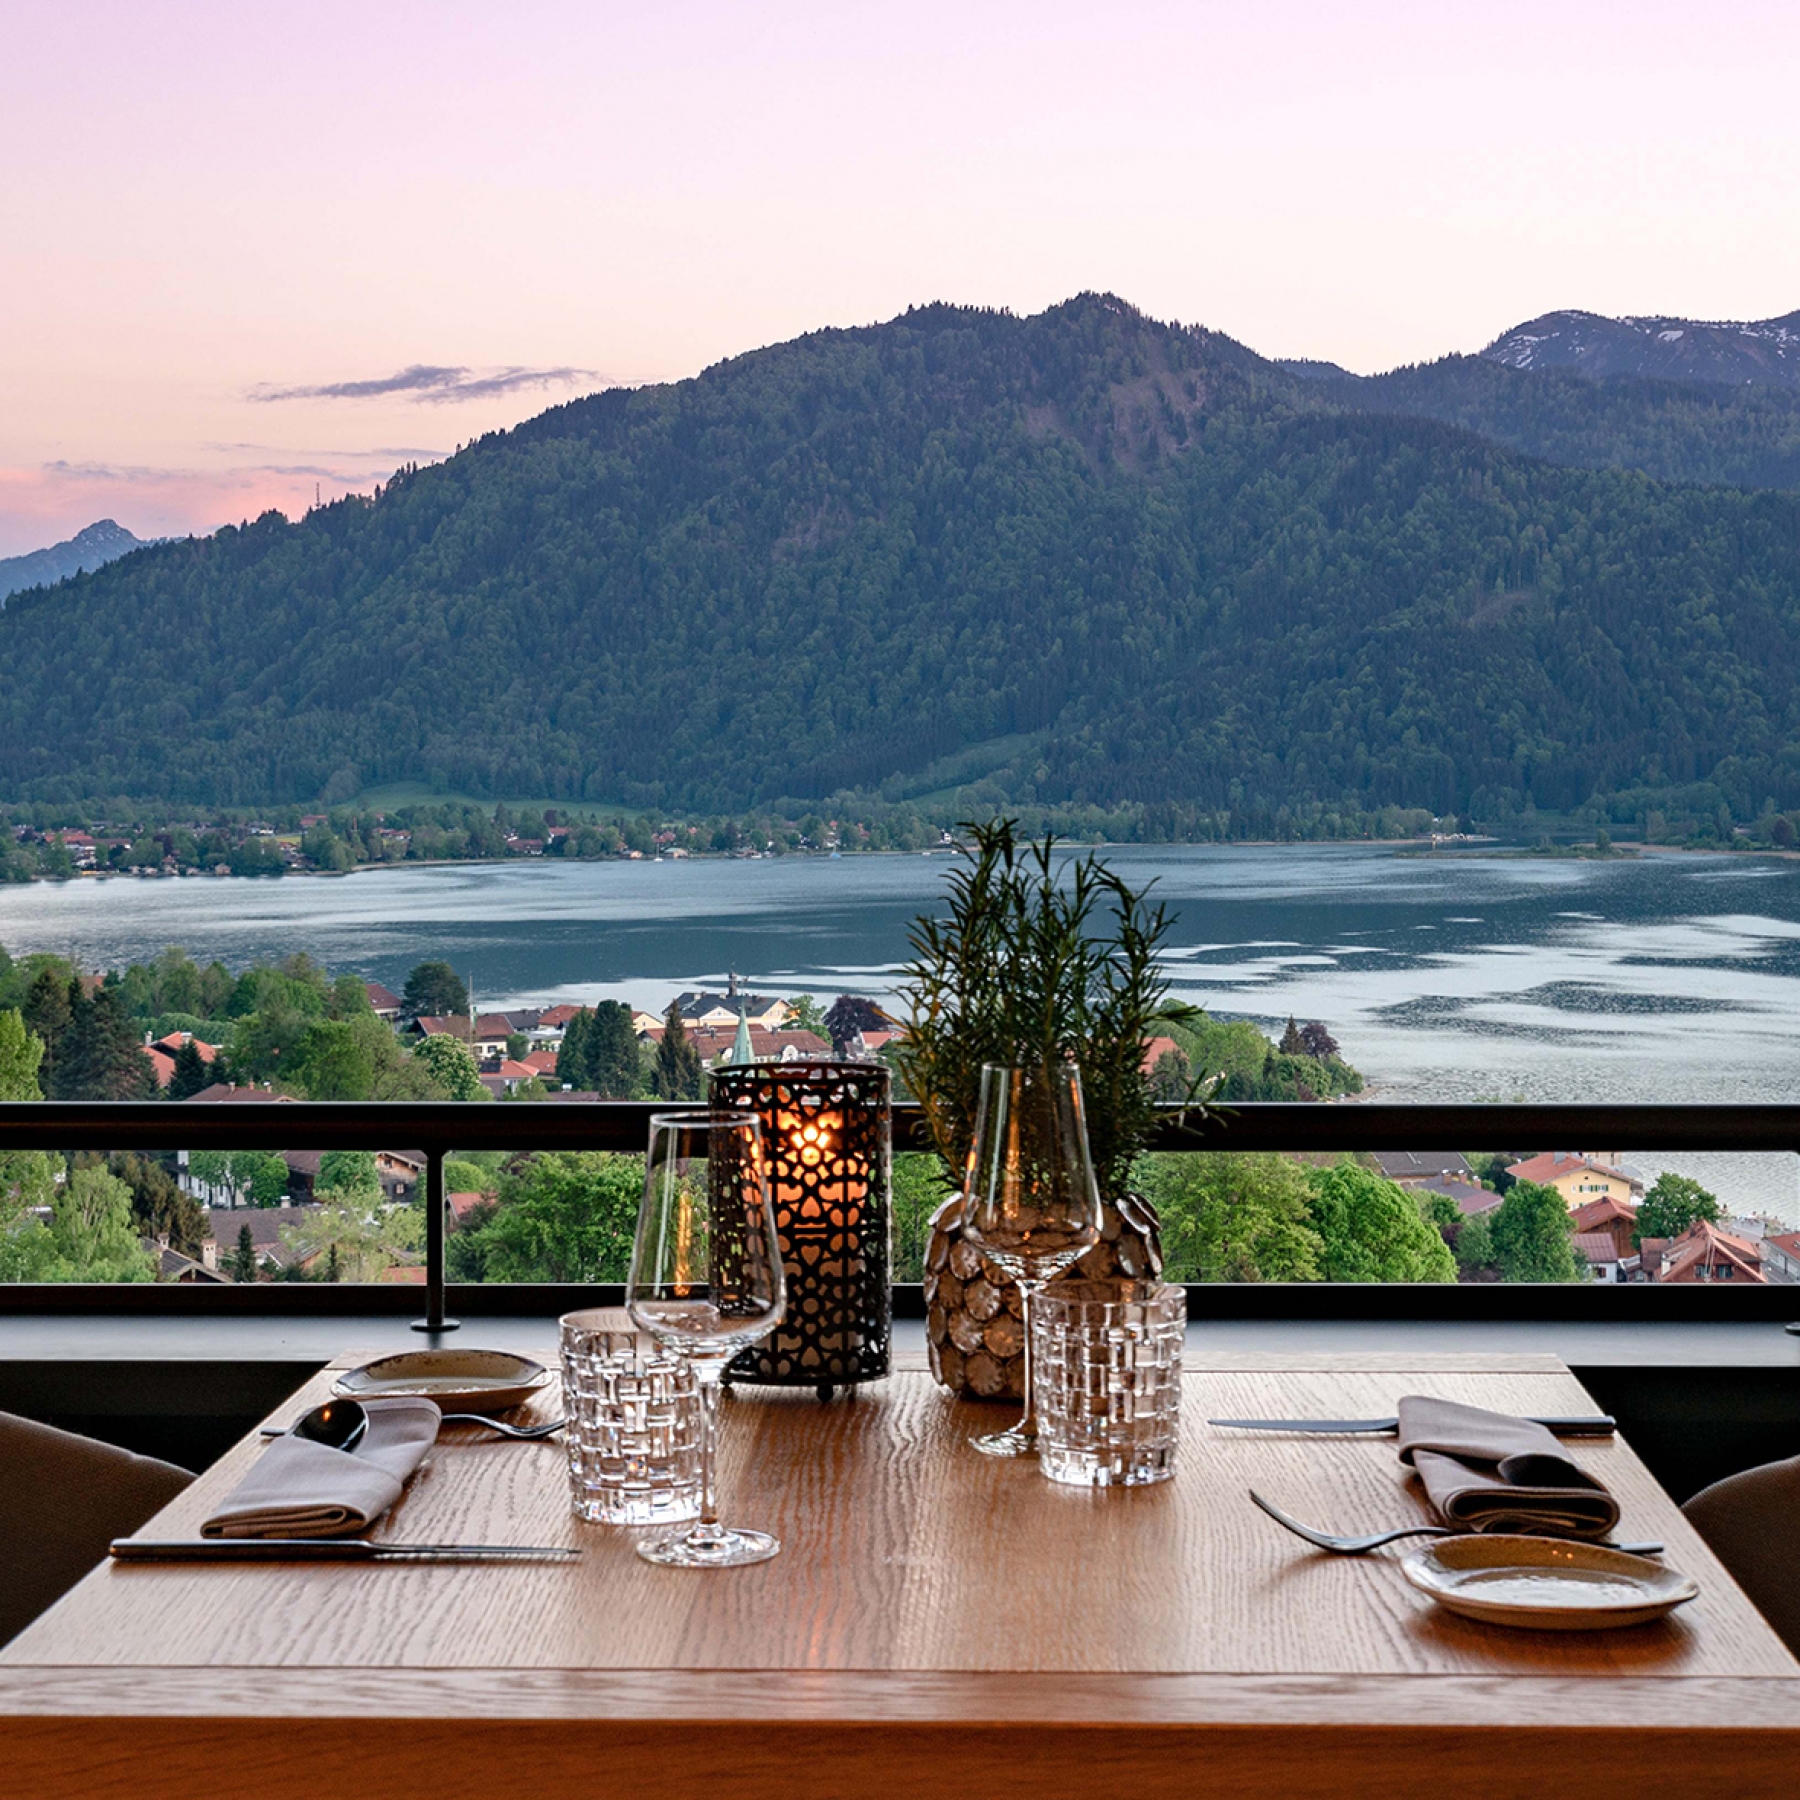 Alpenbrasserie with view of the lake